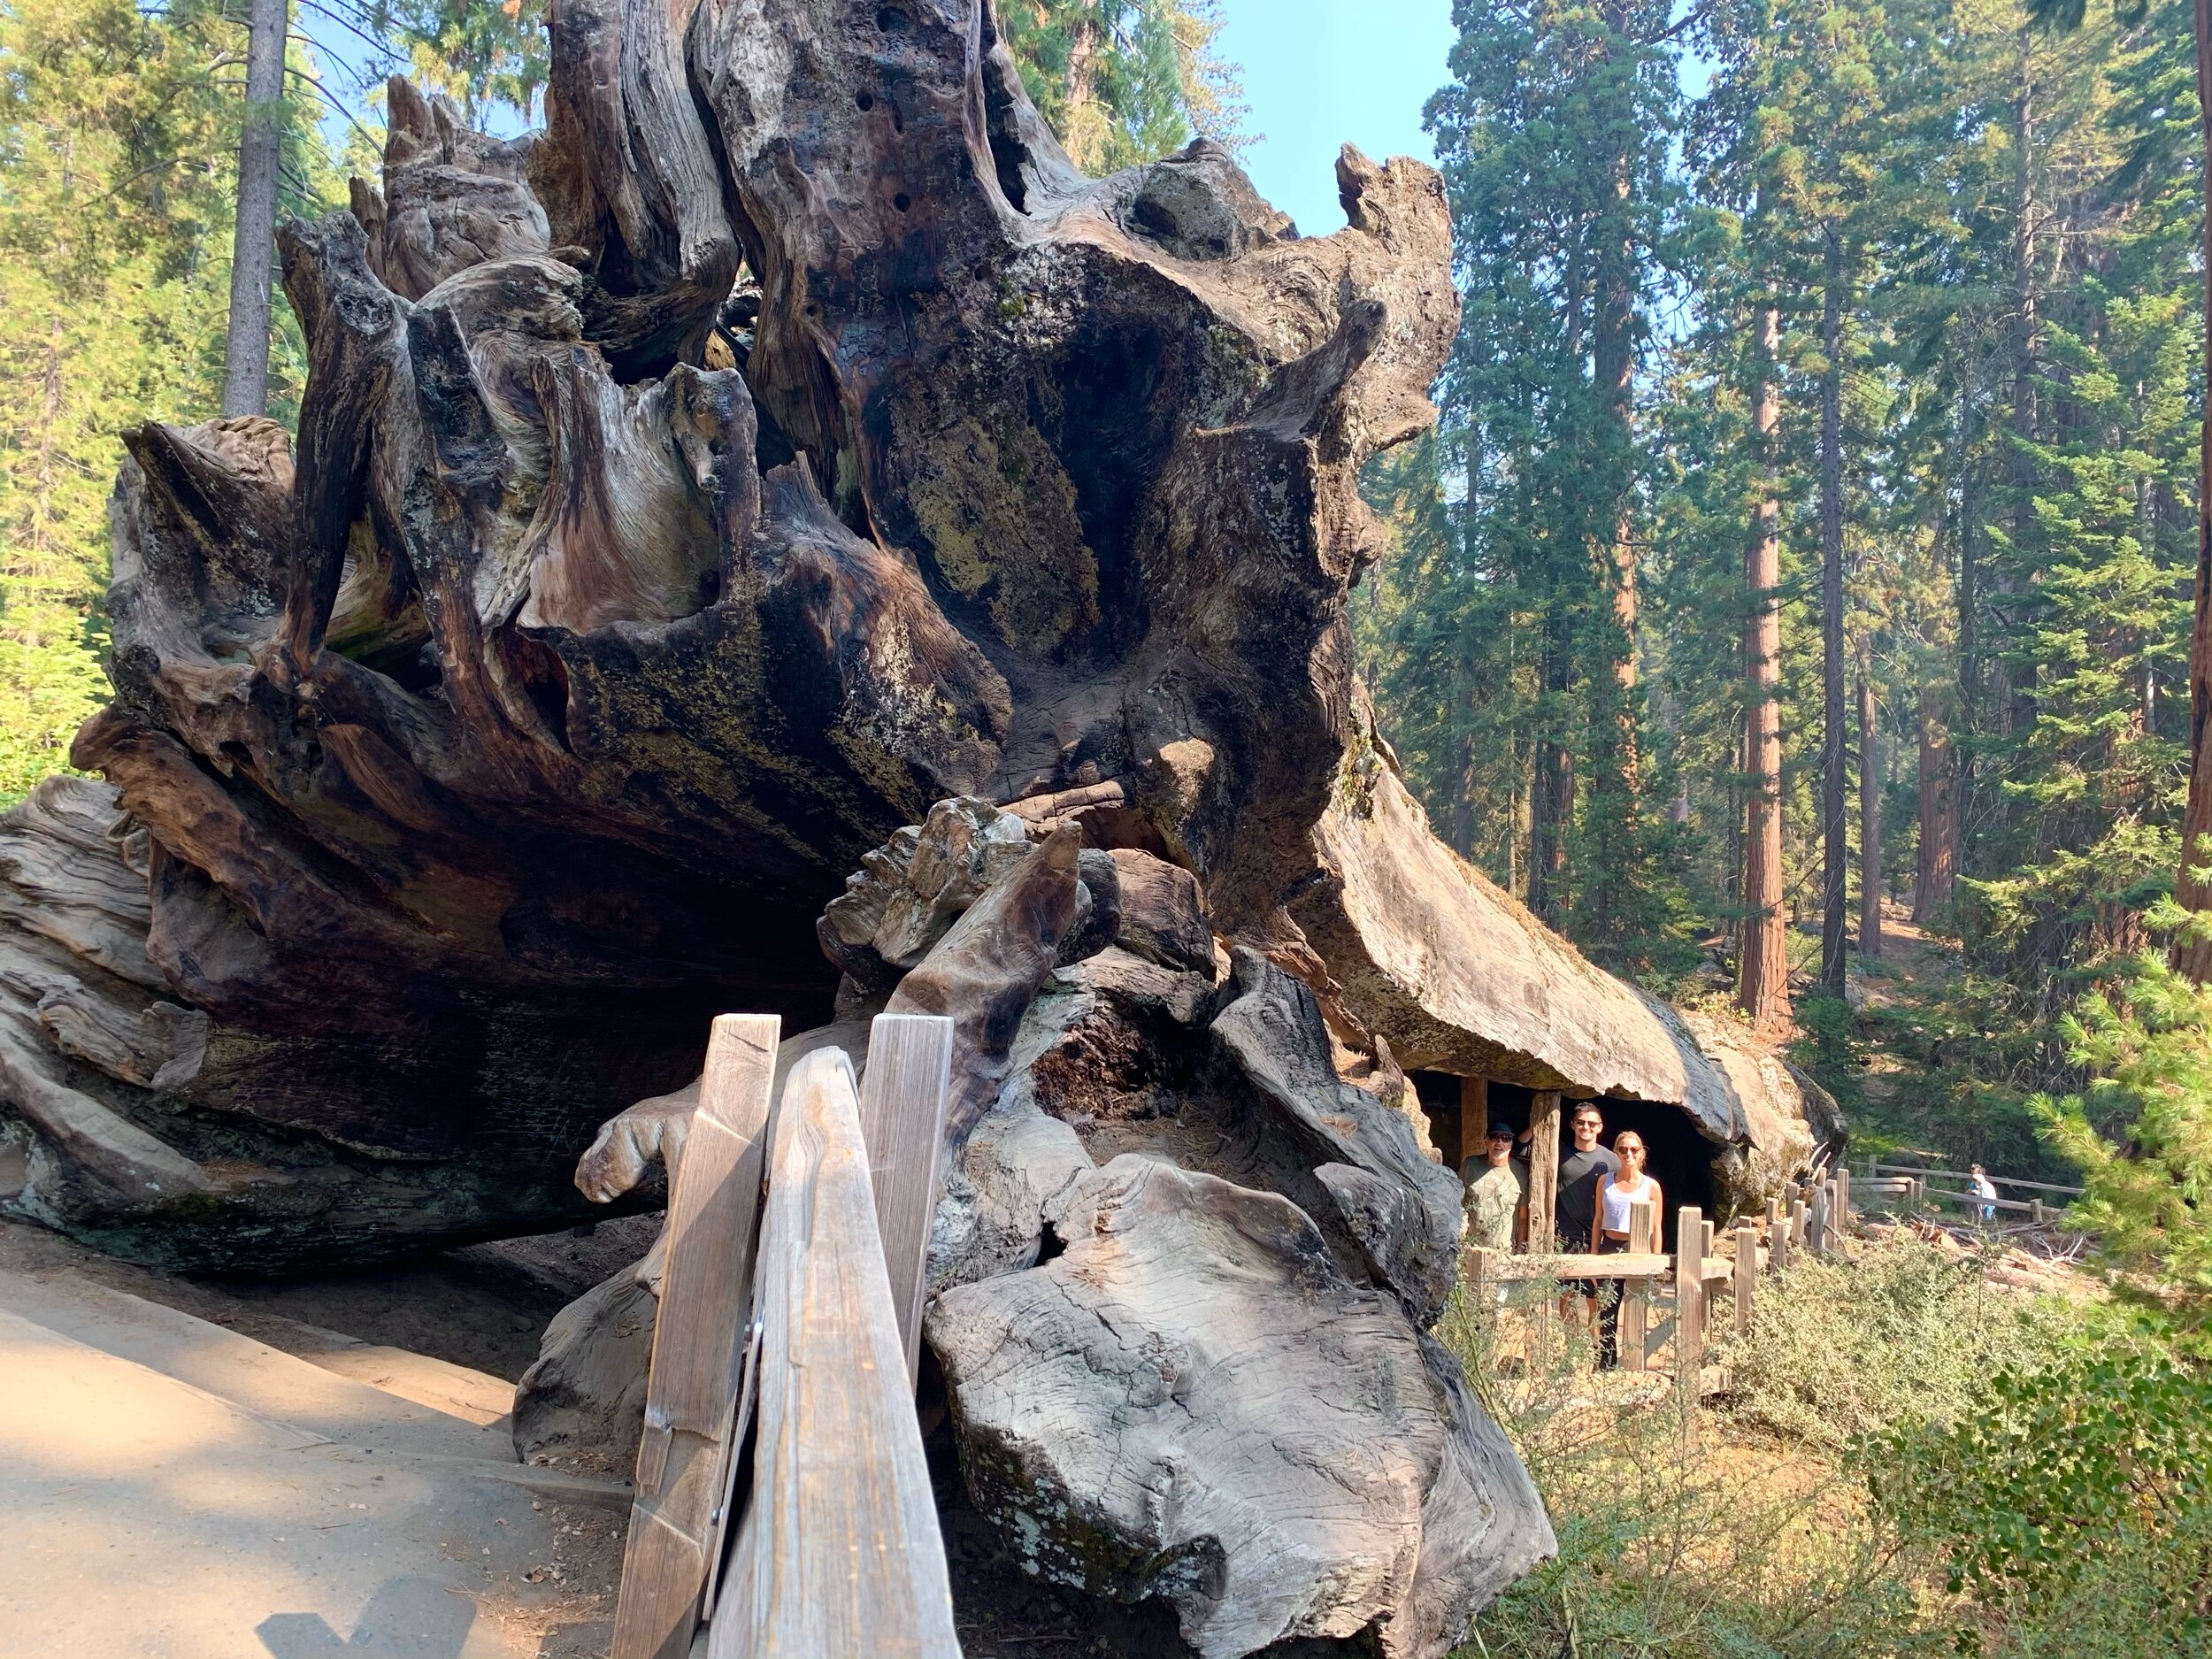   Fallen Monarch Tree  was mostly hollowed out by fire before it fell over 300 hundred years ago. It was used as a living space for two loggers while building a ranger's cabin in the park. Over the years, Fallen Monarch has served many purposes, incl